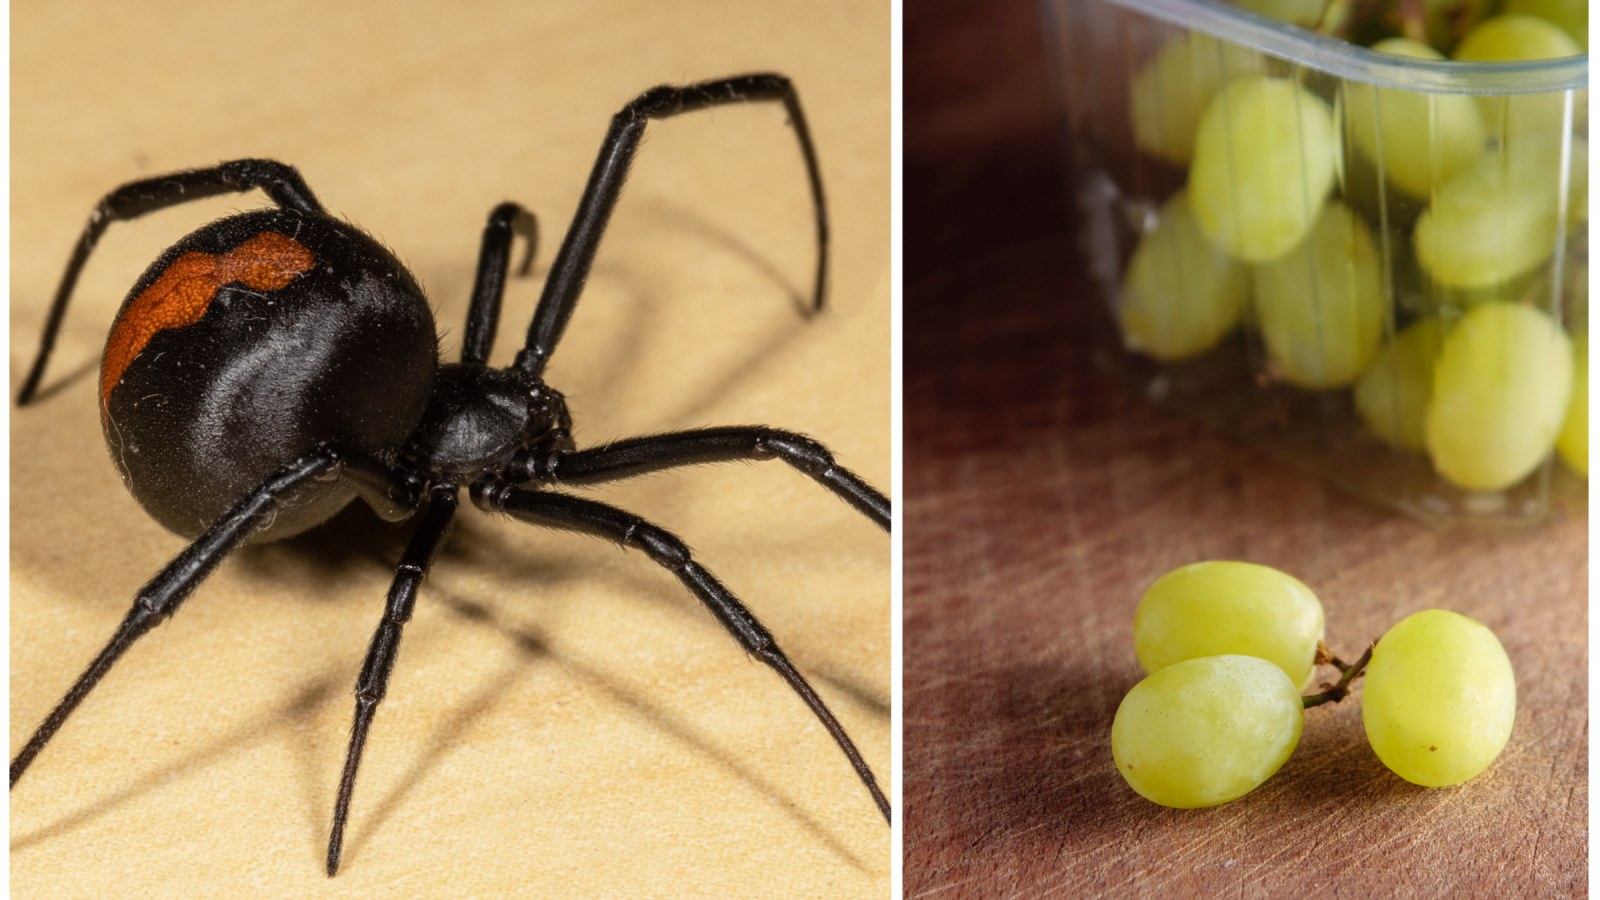 Deadly Venomous Spiders Found in Bags of Grocery Store Grapes